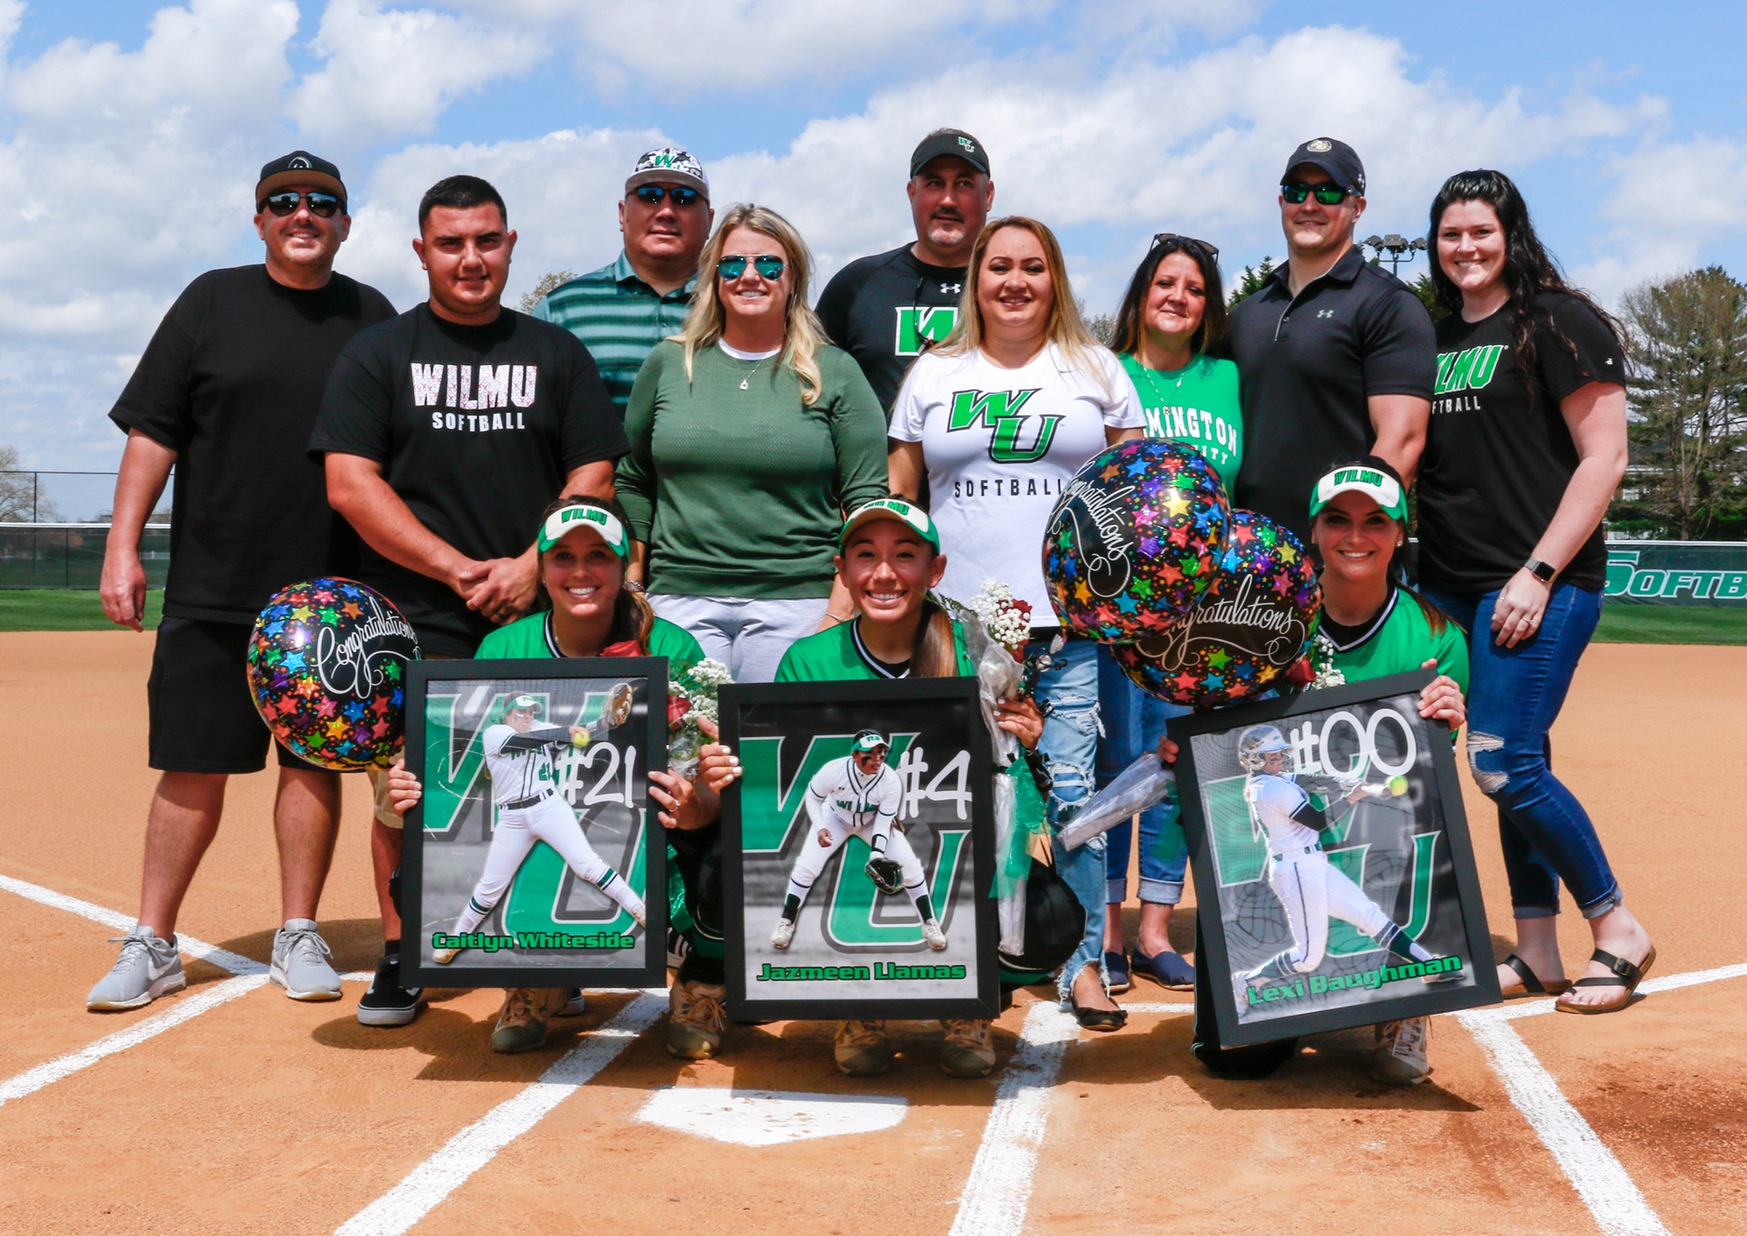 Copyright 2019: Wilmington University. All rights reserved. Photo by Chris Vitale. April 13, 2019 vs. Caldwell (Senior Day)